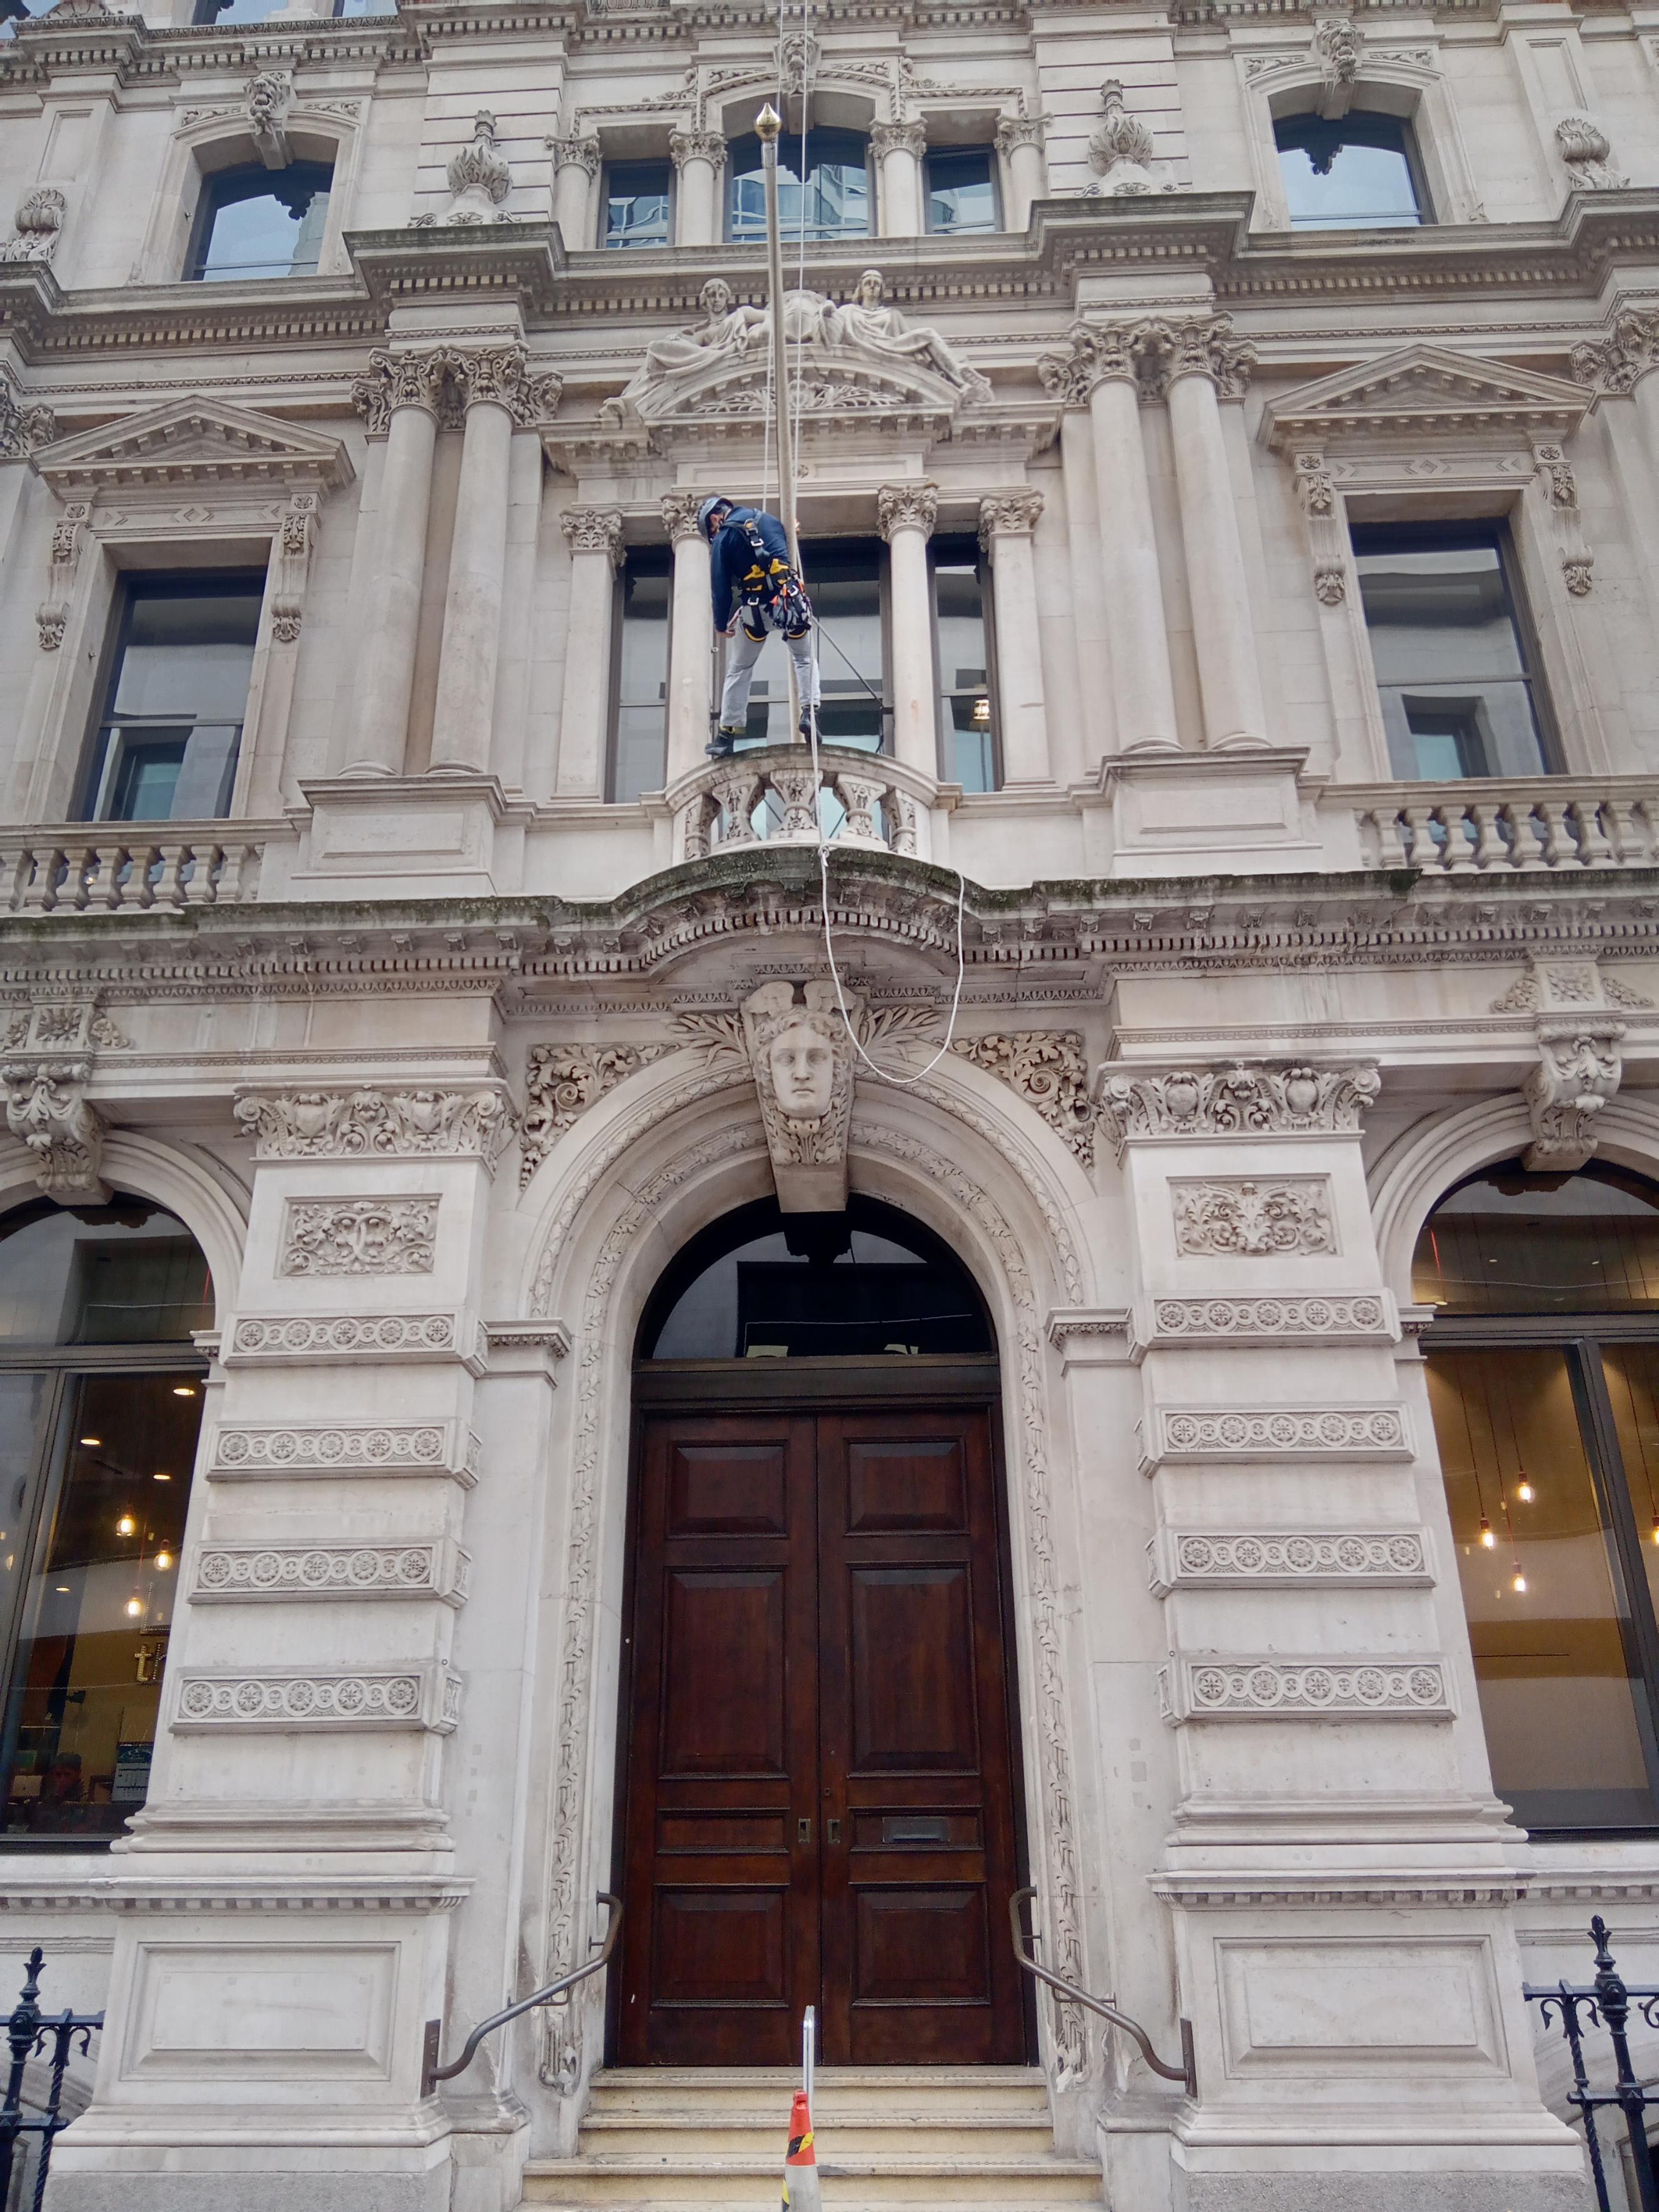 PTSG completes inspection of Grade II listed London building